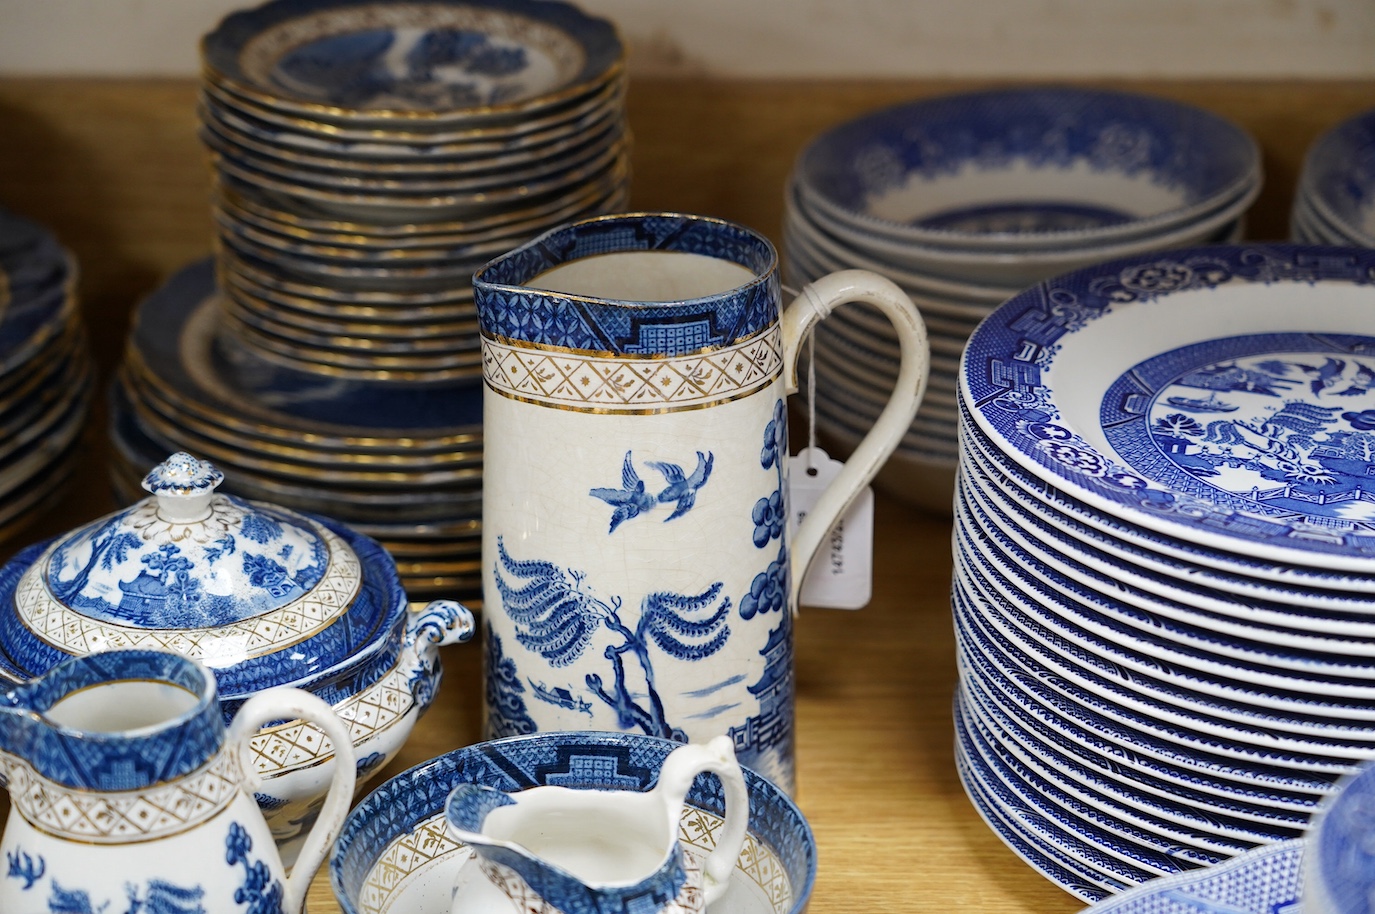 A large collection of Booths Real Old Willow, Woods Ware Willow and Old Chelsea blue and white dinner wares - condition - fair to good